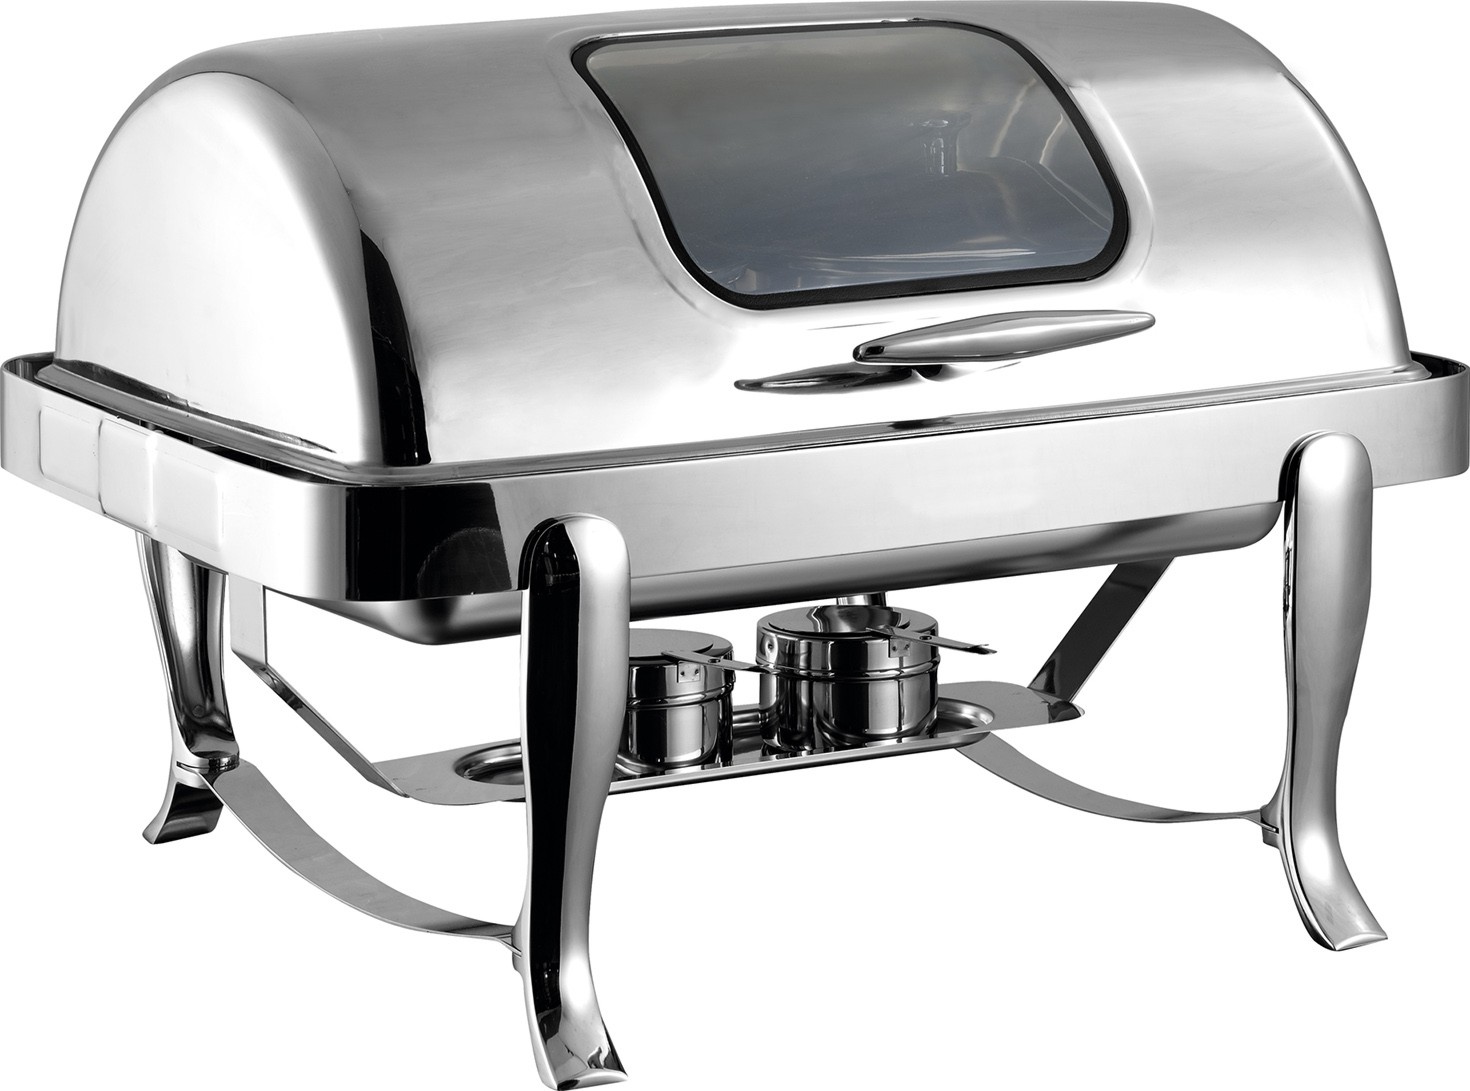 GRT6801KS Stainless Steel Visible Window Round Chafing Dish 9L 